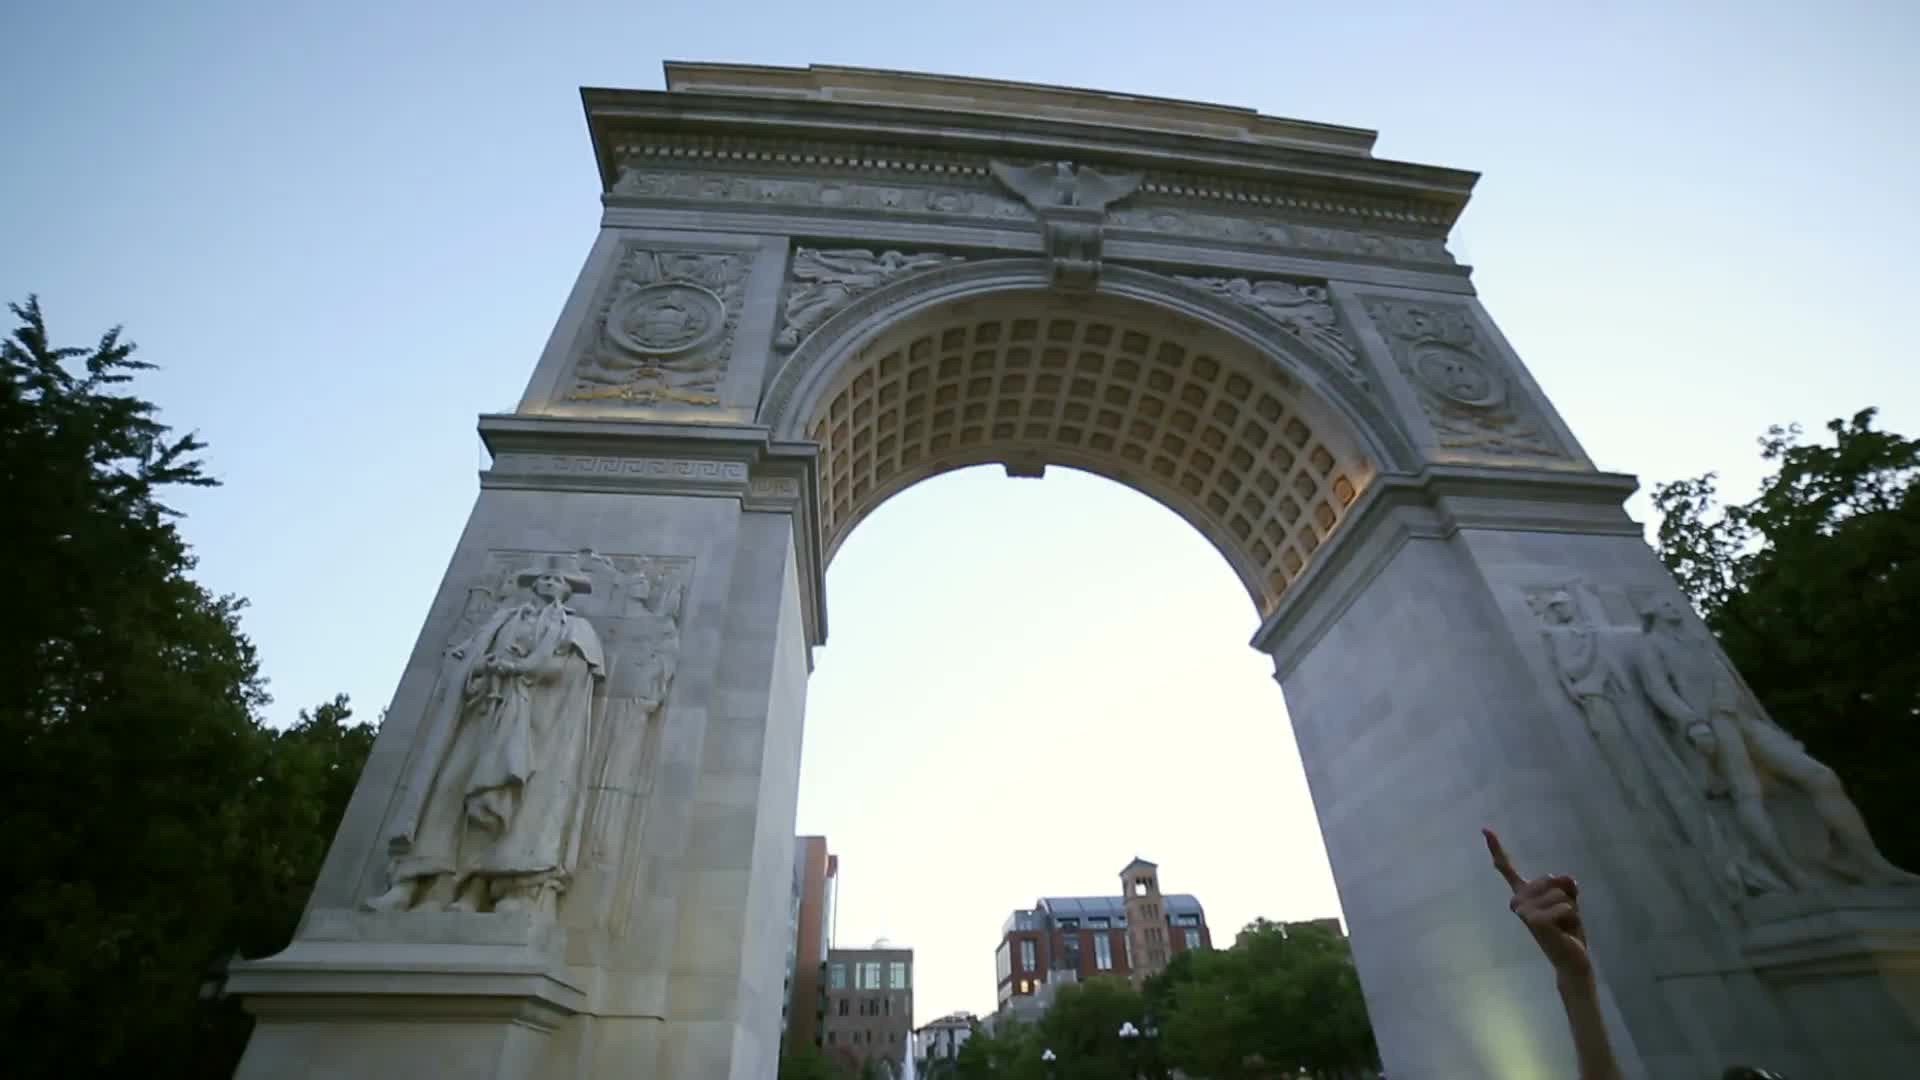 man arguing with pro-Palestinian protestor under arch in Washington Square Park in NYC